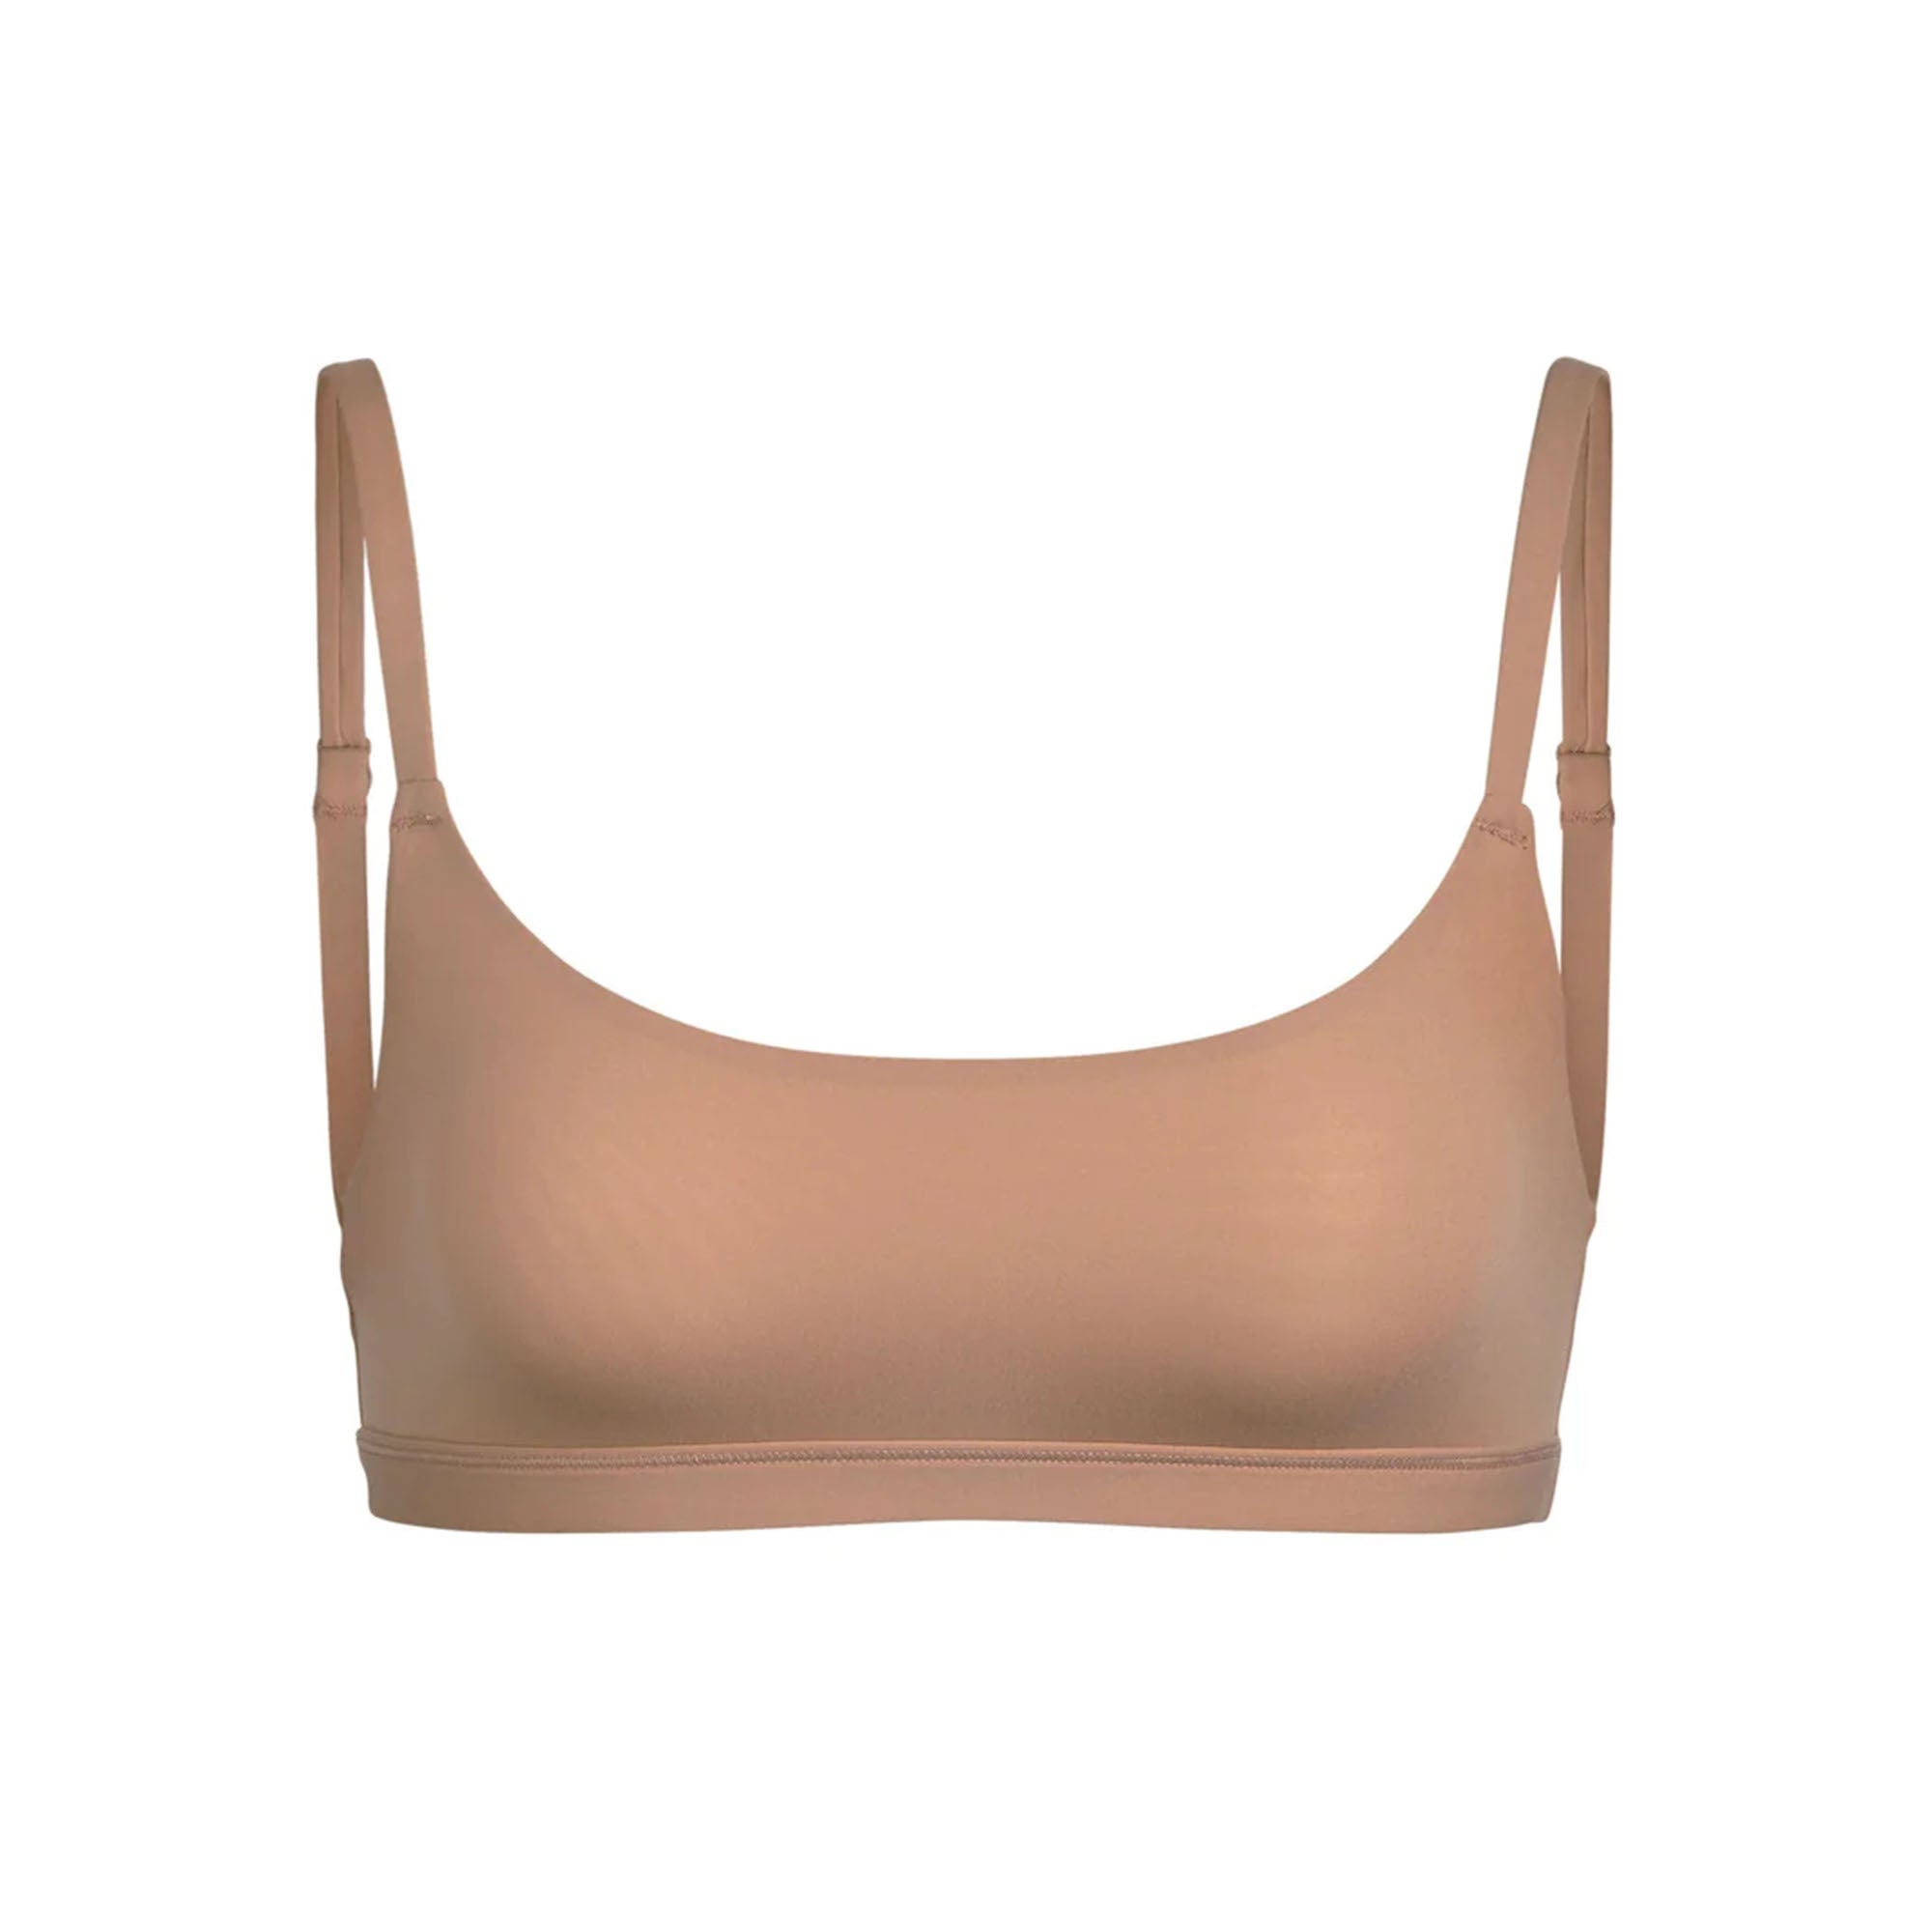 bralettes that are identical to the Skim's scoop bralette